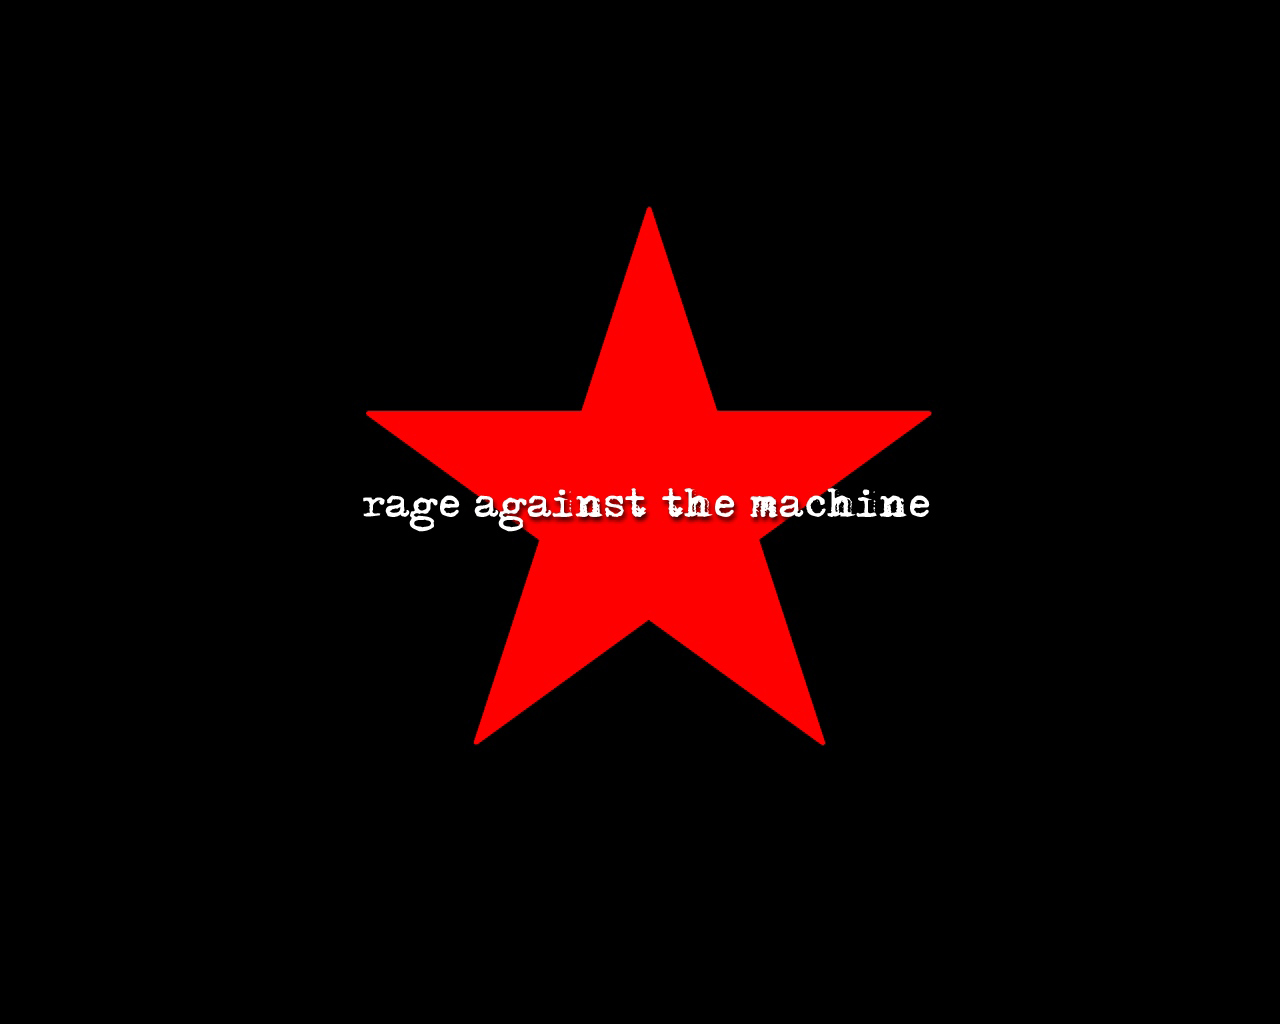 Rage Against The Machine Images. 